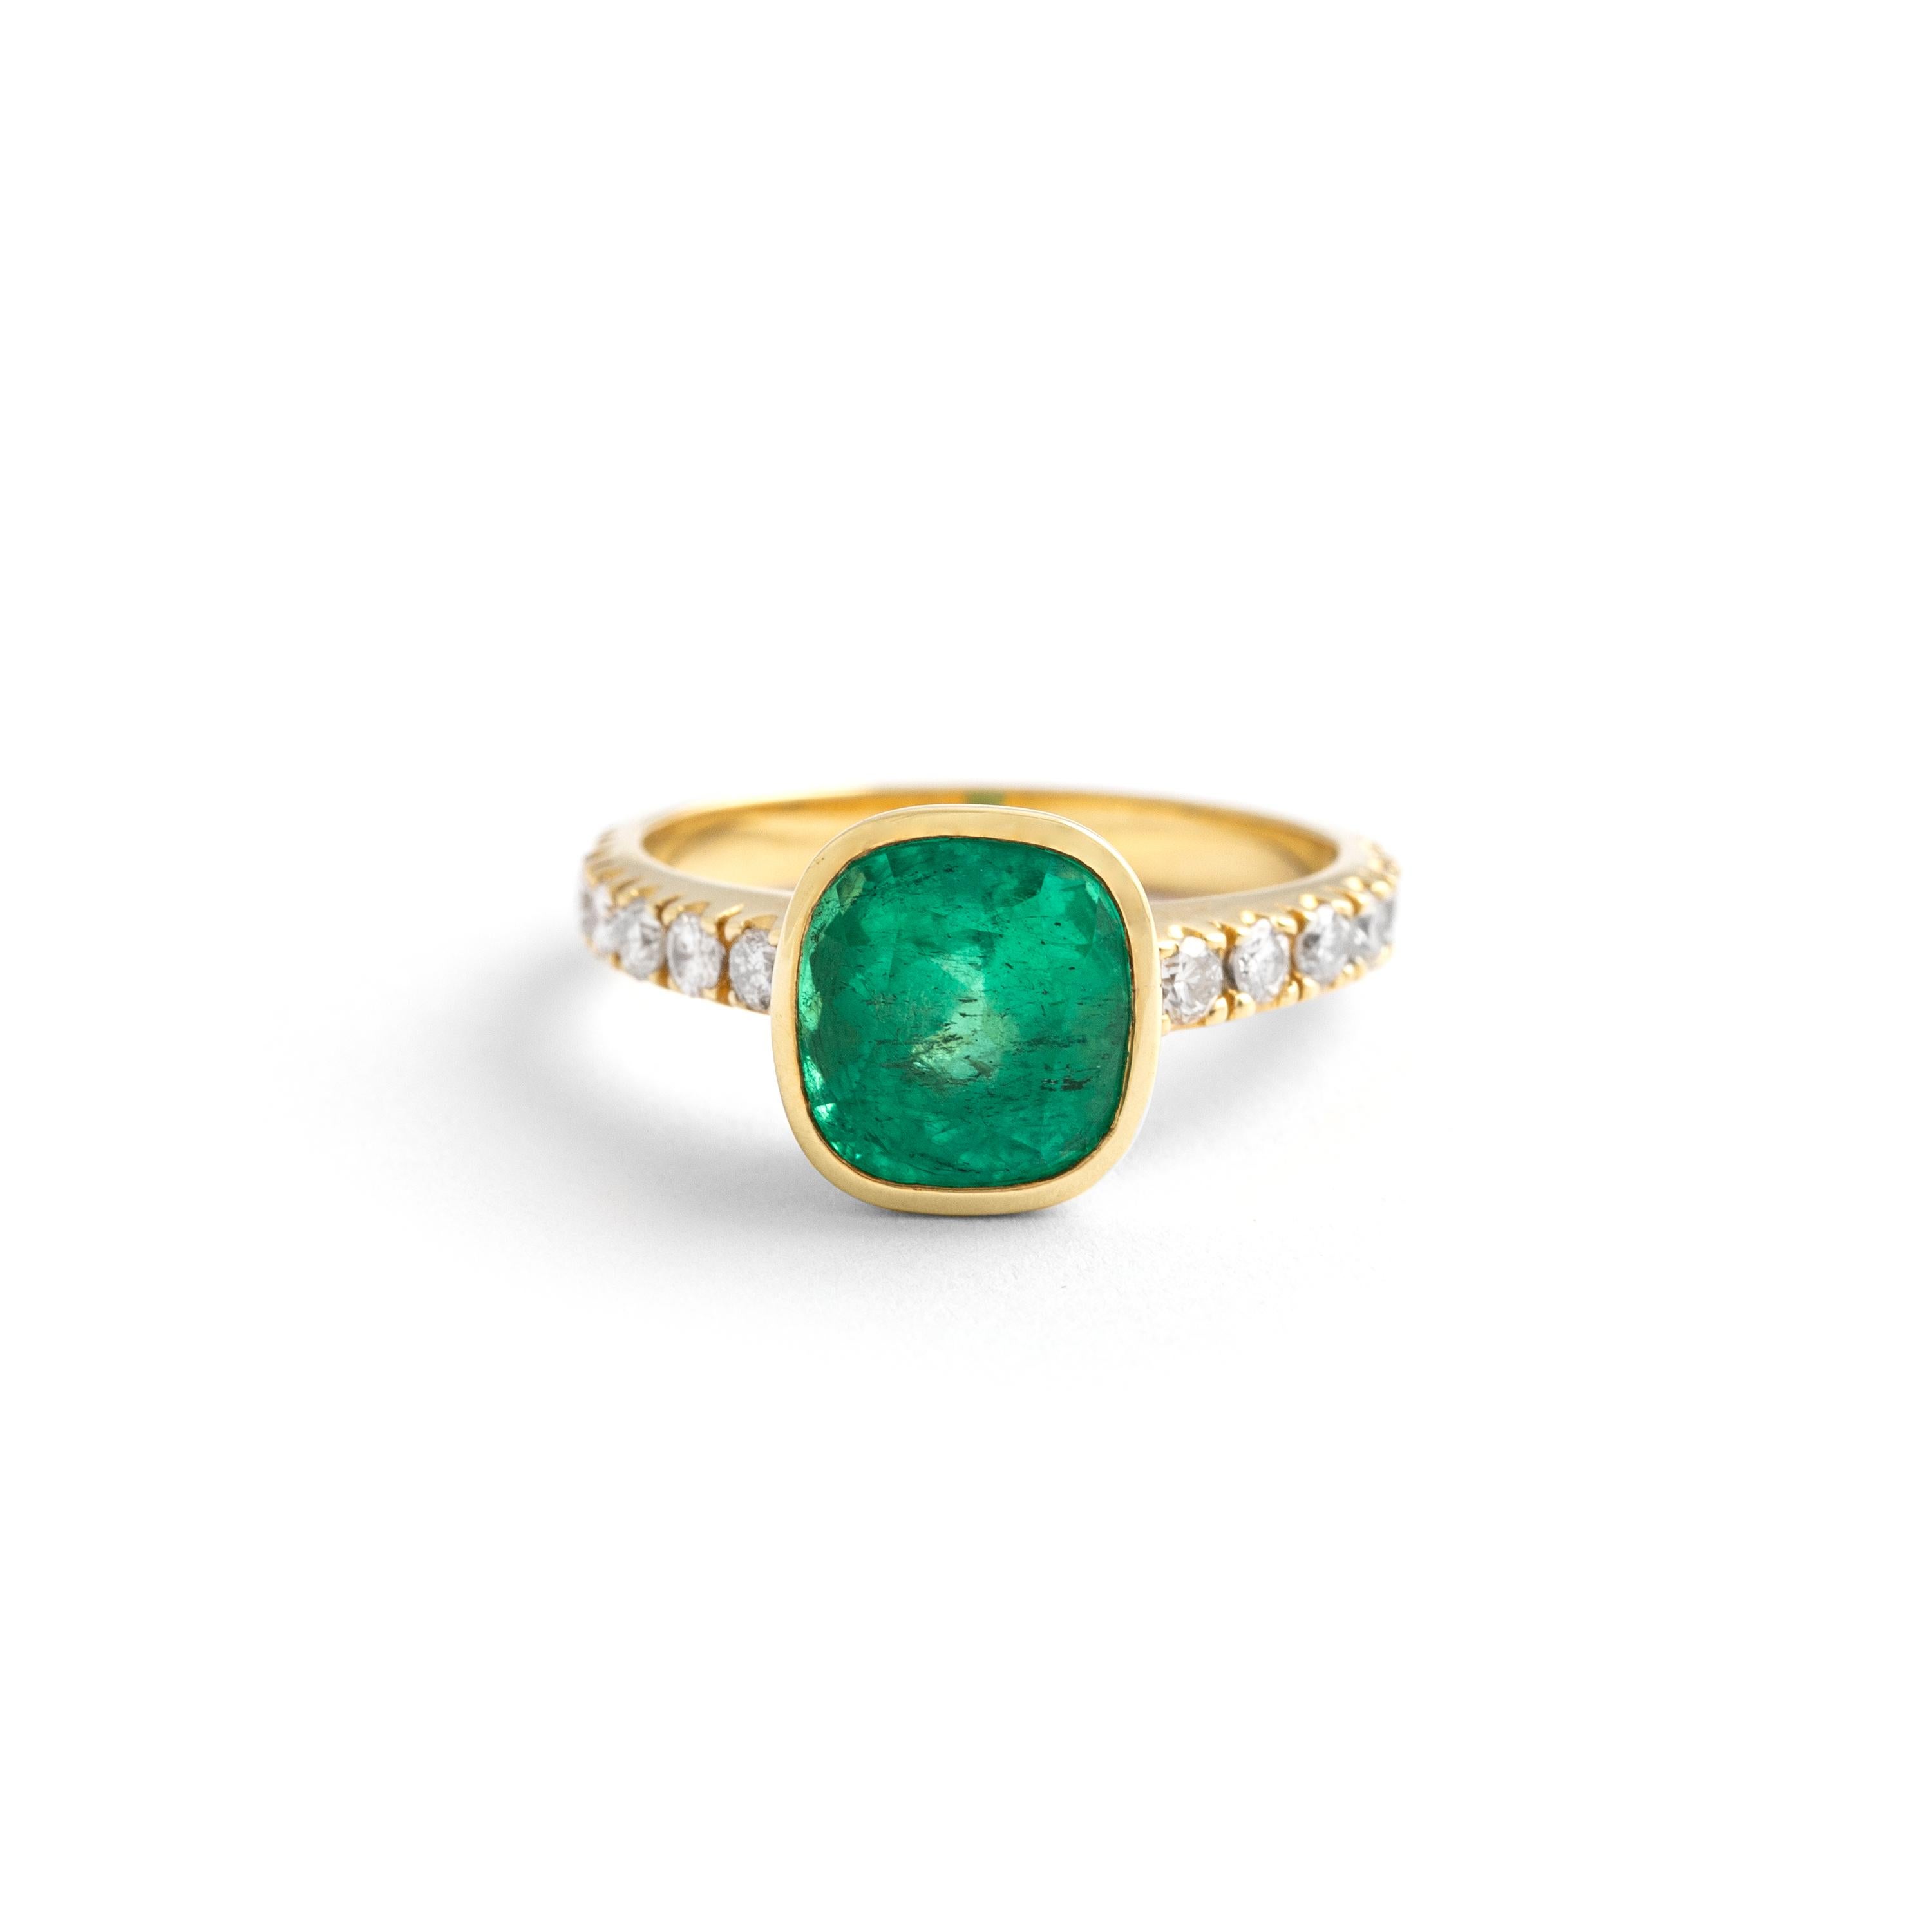 3.22 carat Colombian Muzo Emerald enhancement minor, with certificate. Ring yellow gold 18k with diamond.
Weight: 4.53 grams.
Size: 52.